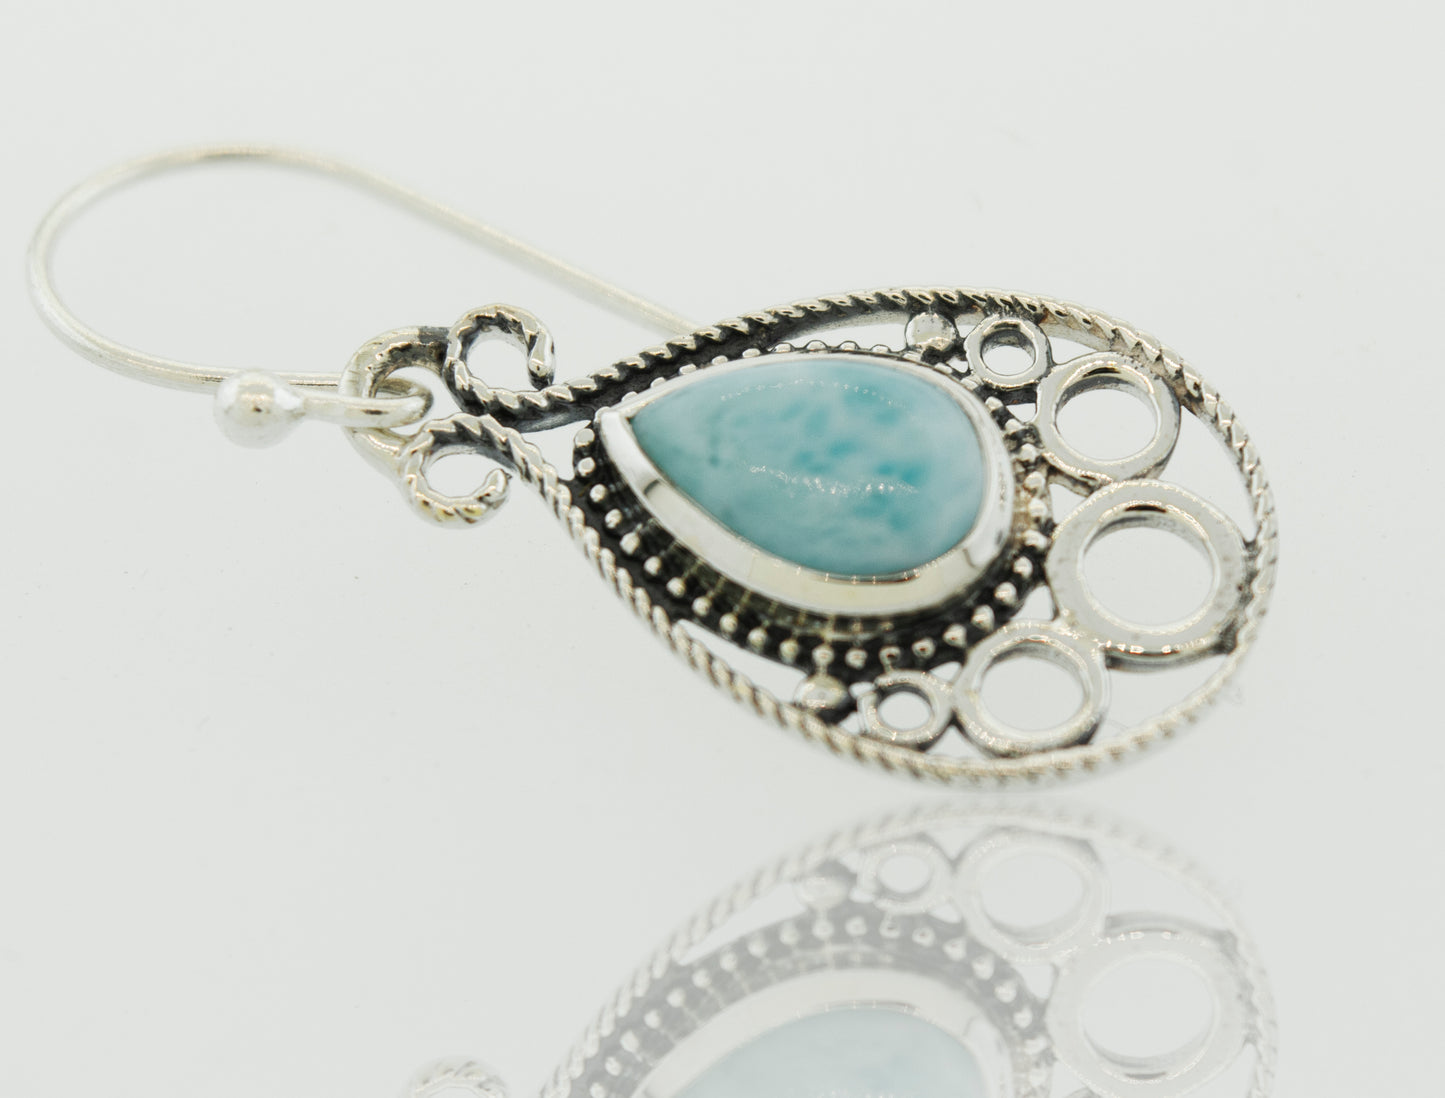 A pair of Teardrop Shape Larimar Earrings by Super Silver with a turquoise stone.